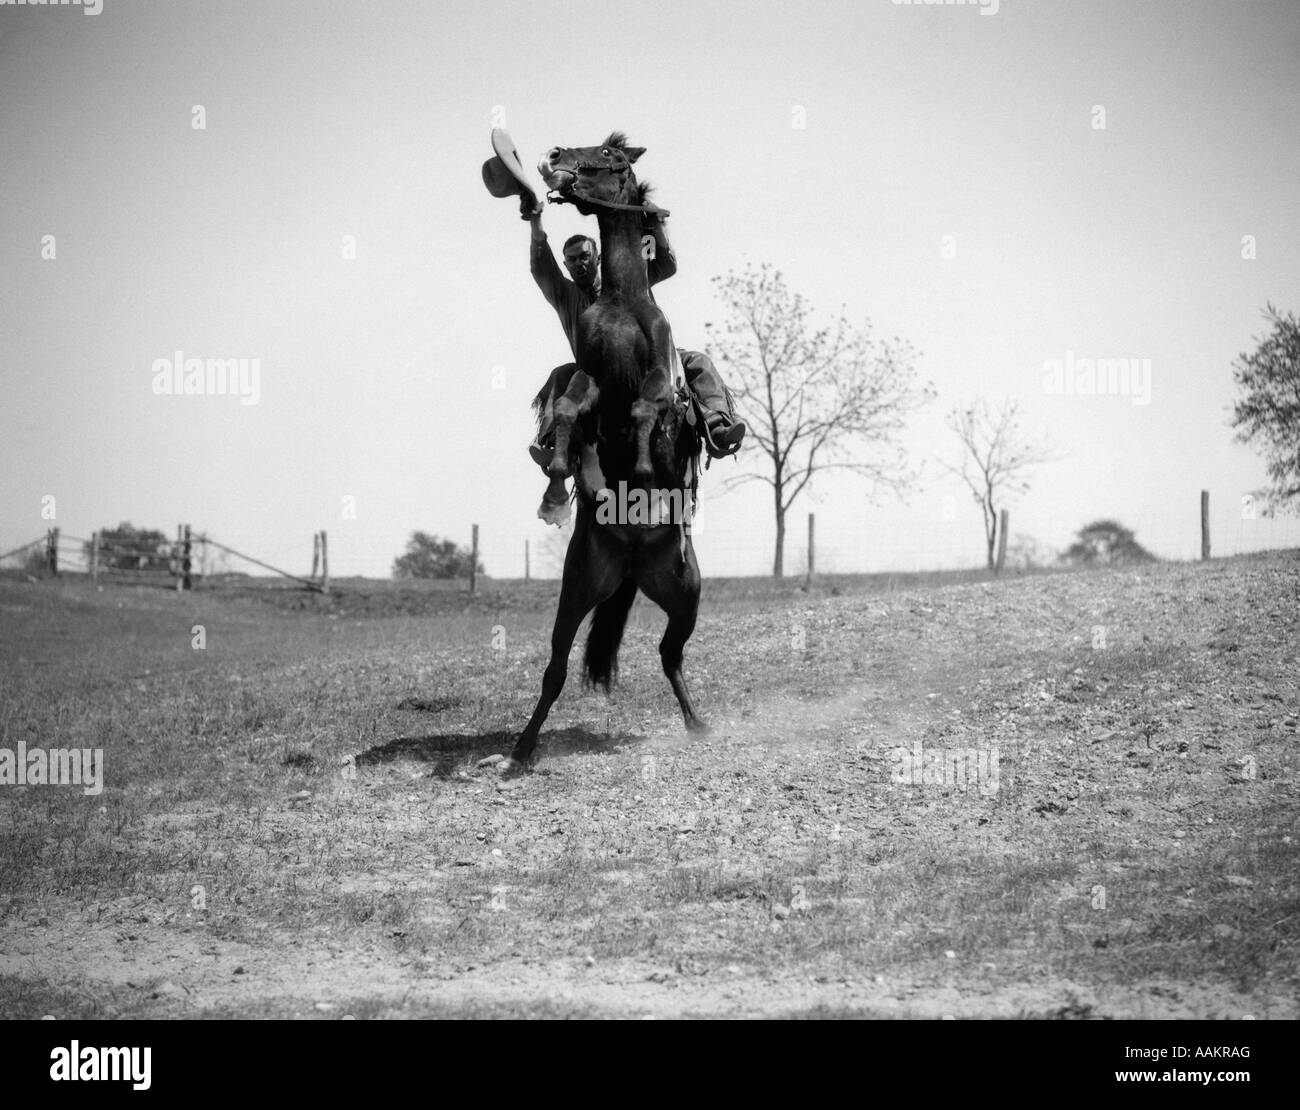 1920s 1930s COWBOY ON HORSE REARING UP MAN WAVING HAT IN HAND Stock Photo